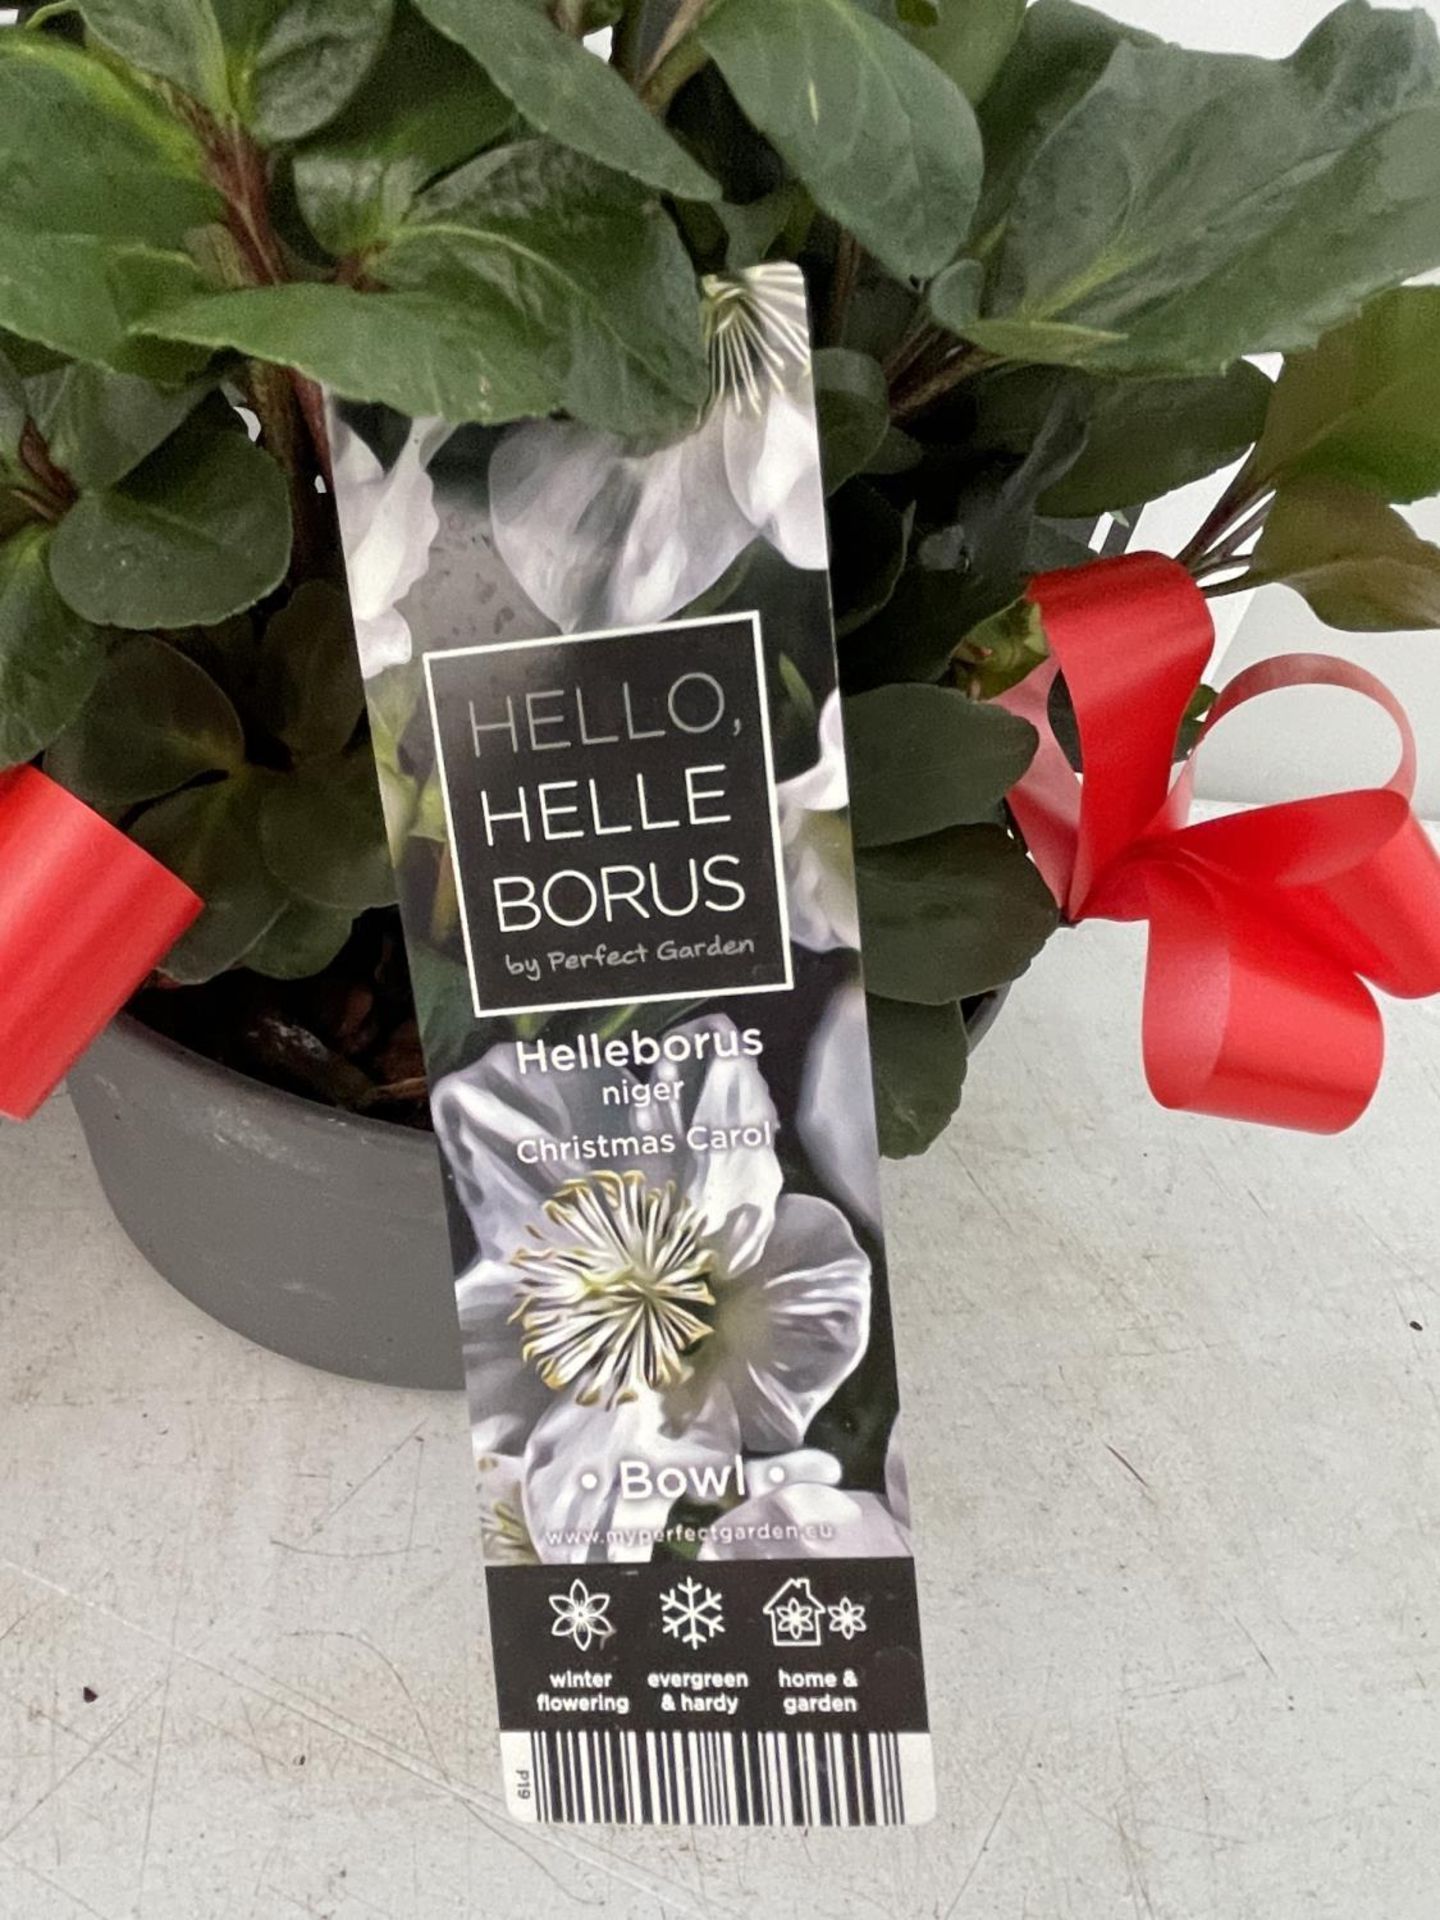 TWO HELLEBOROUS WHITE NIGER CHRISTMAS CAROL IN A 3 LTR BOWL + VAT TO BE SOLD FOR THE TWO - Image 7 of 8